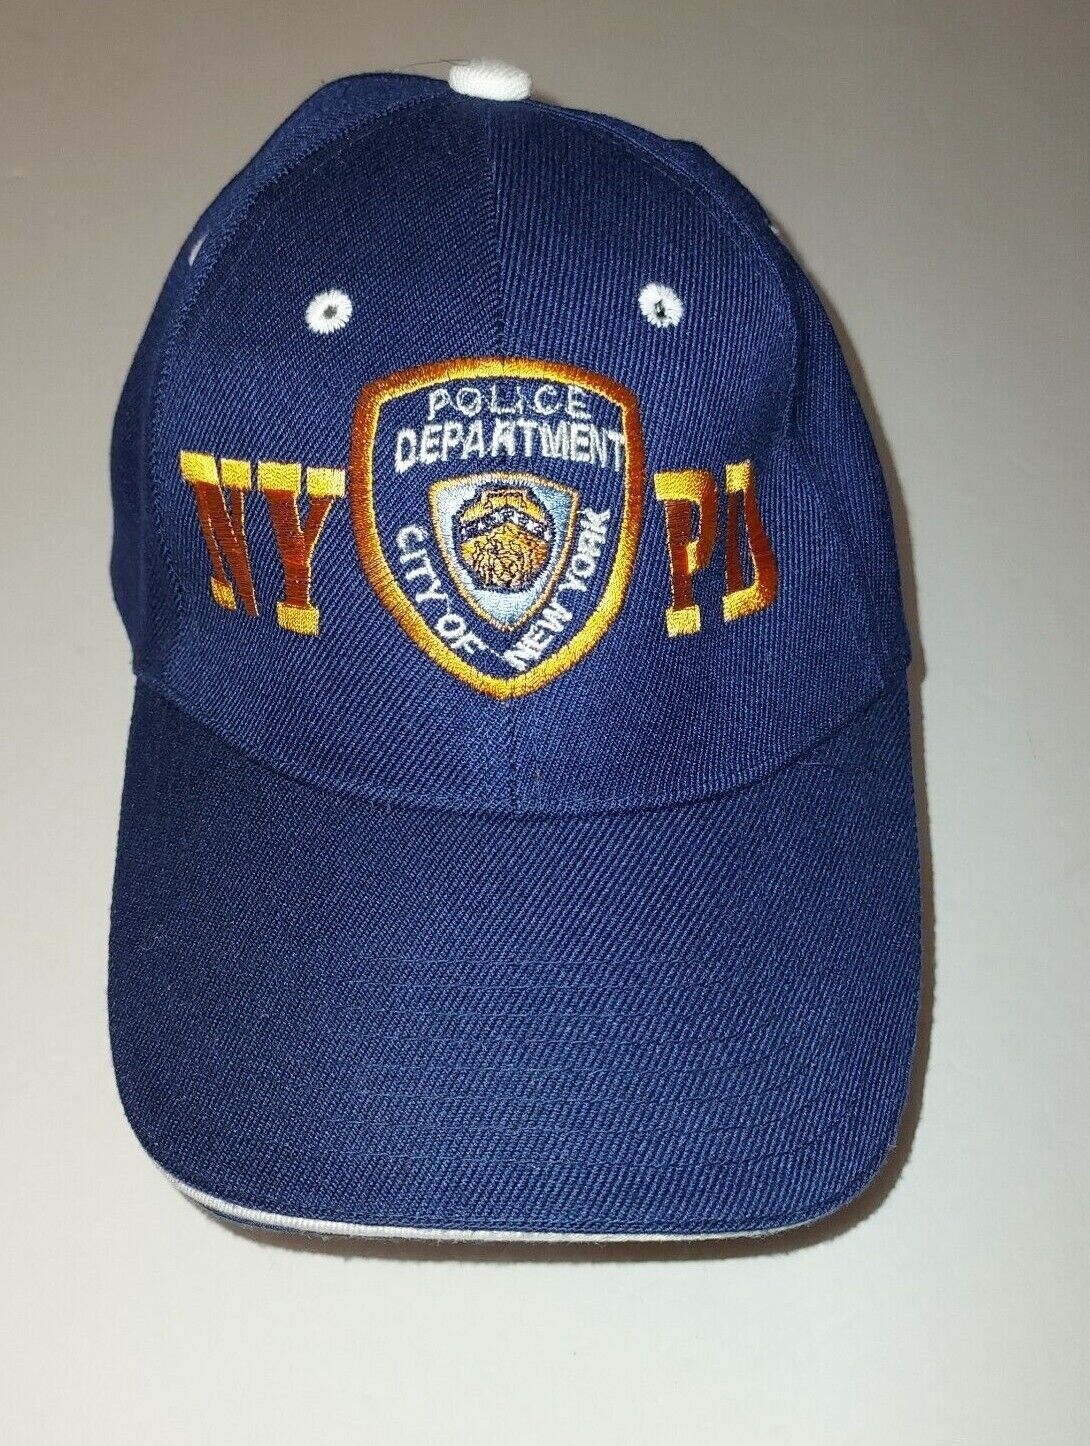 NYPD BASEBALL Cap HAT - New York Police Department - Adjustable